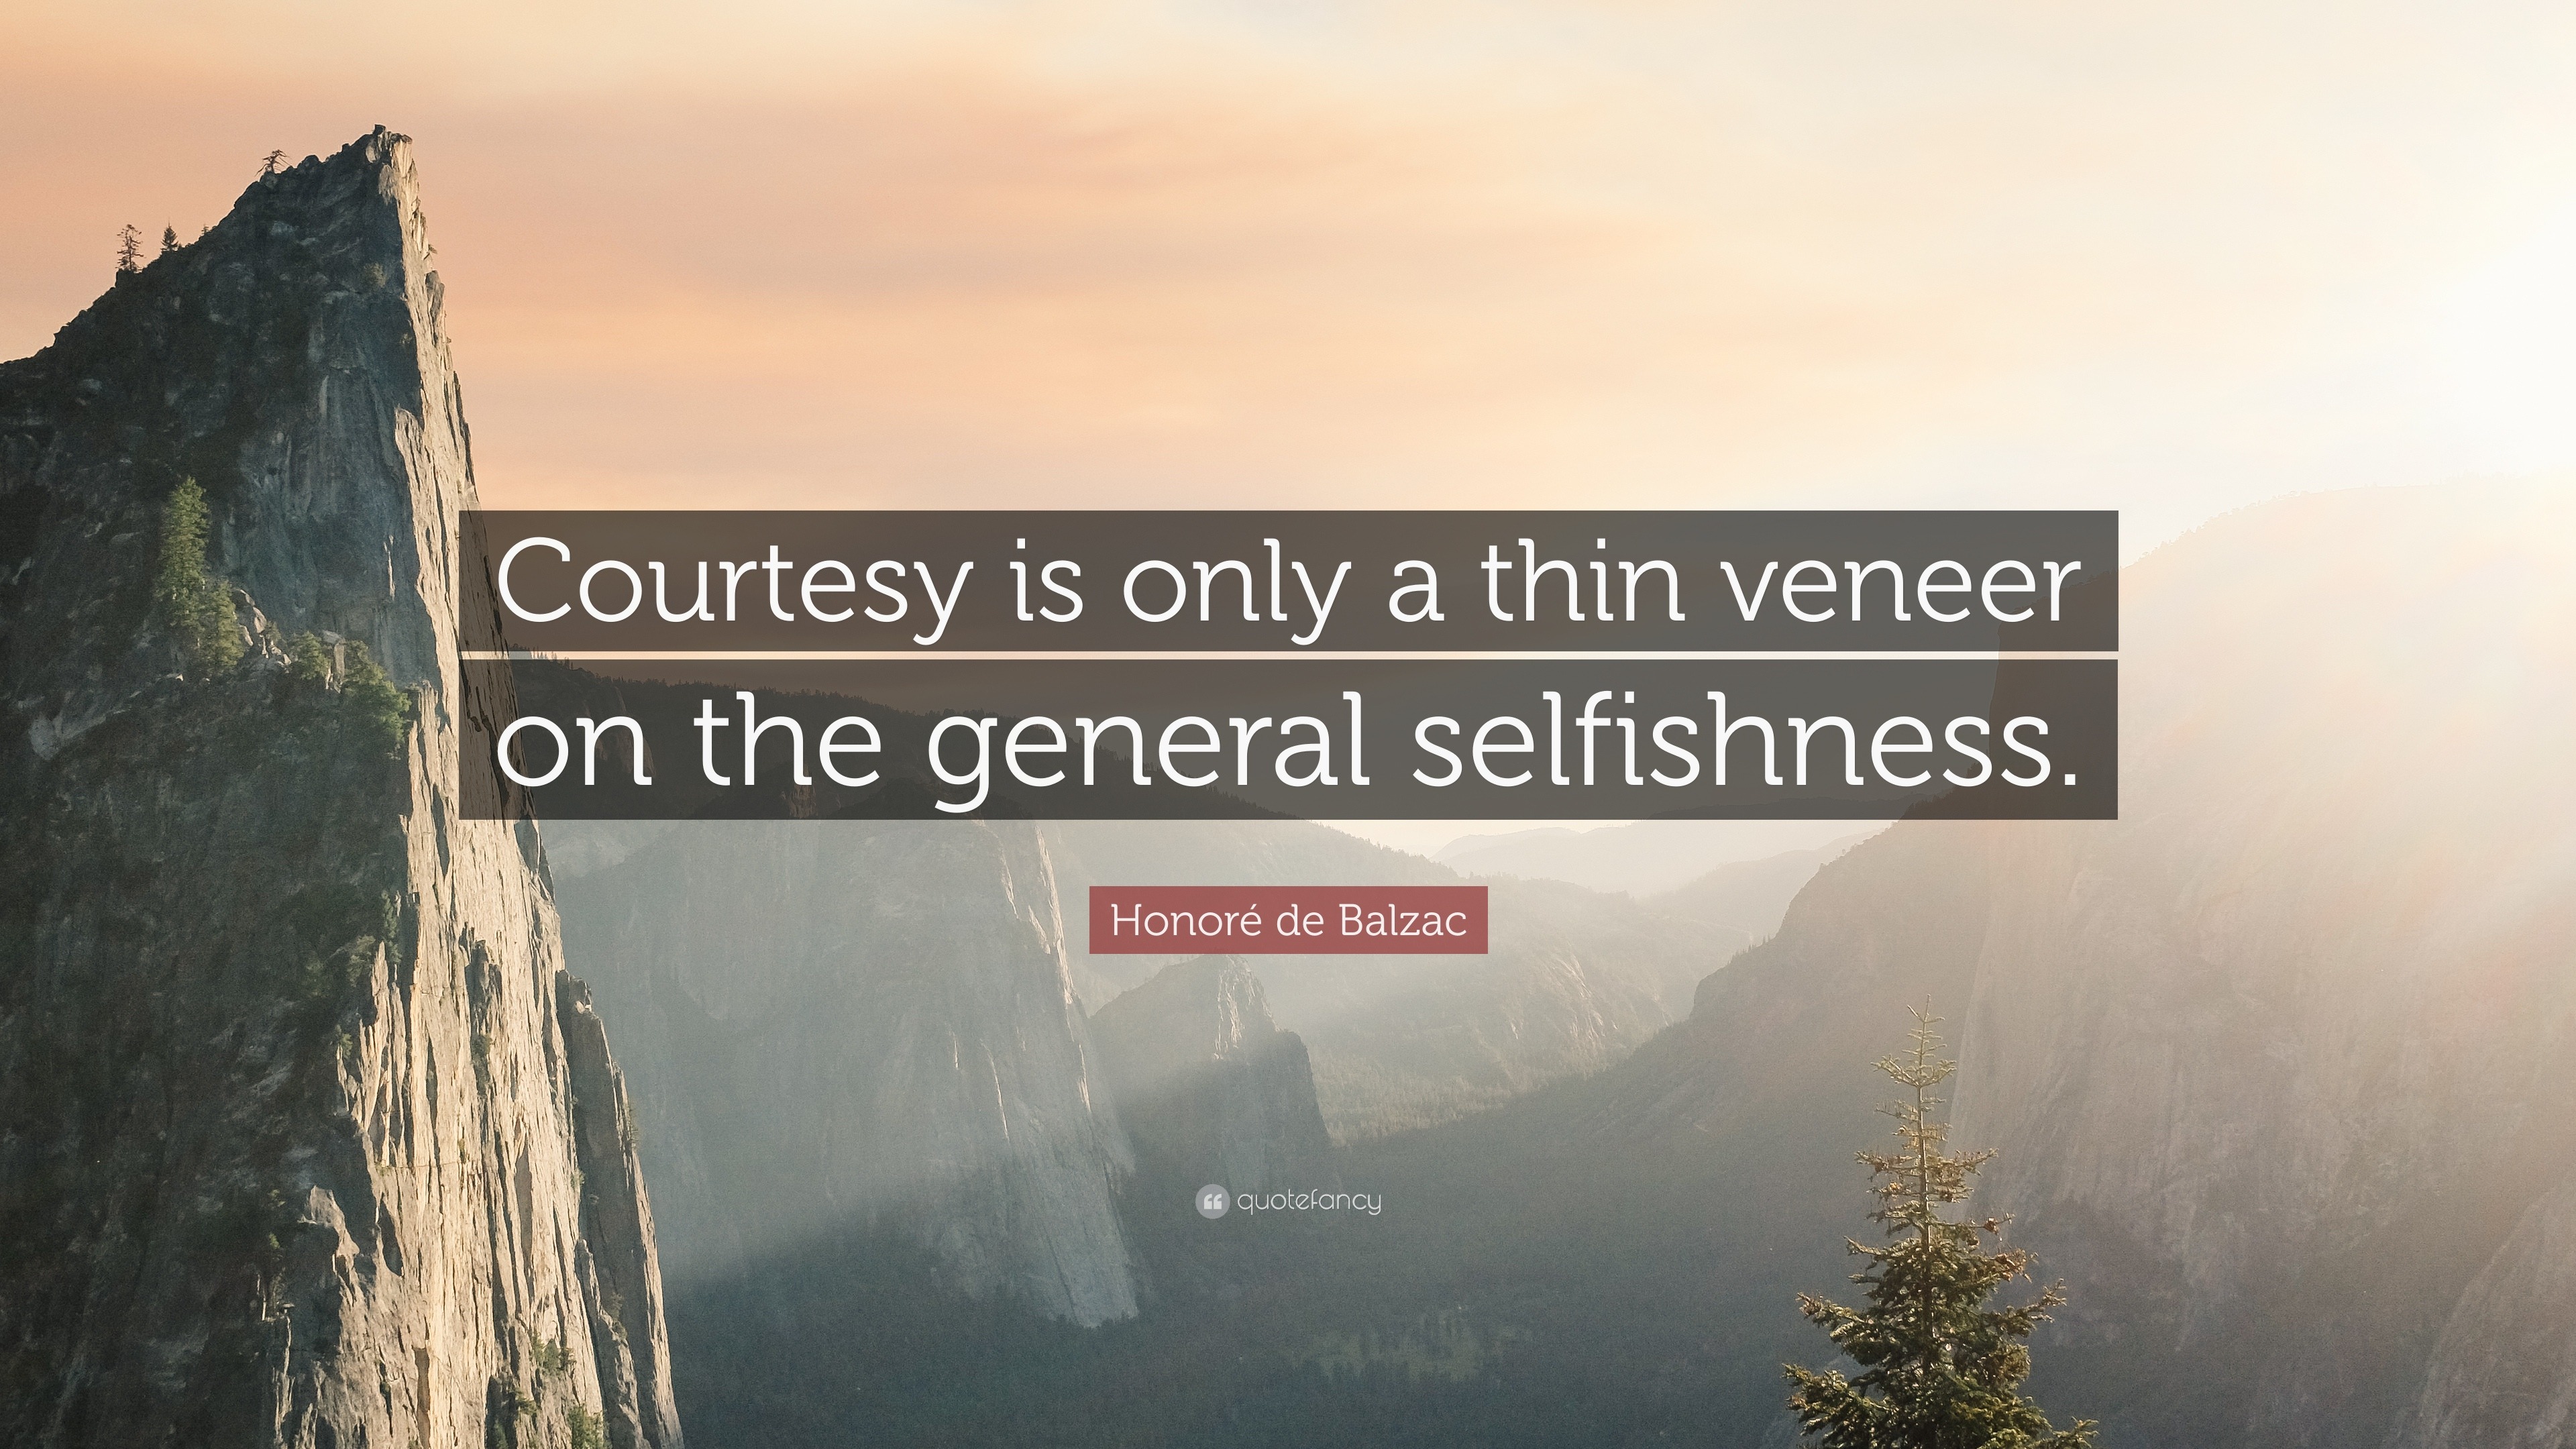 Honoré de Balzac Quote: “Courtesy is only a thin veneer on the general